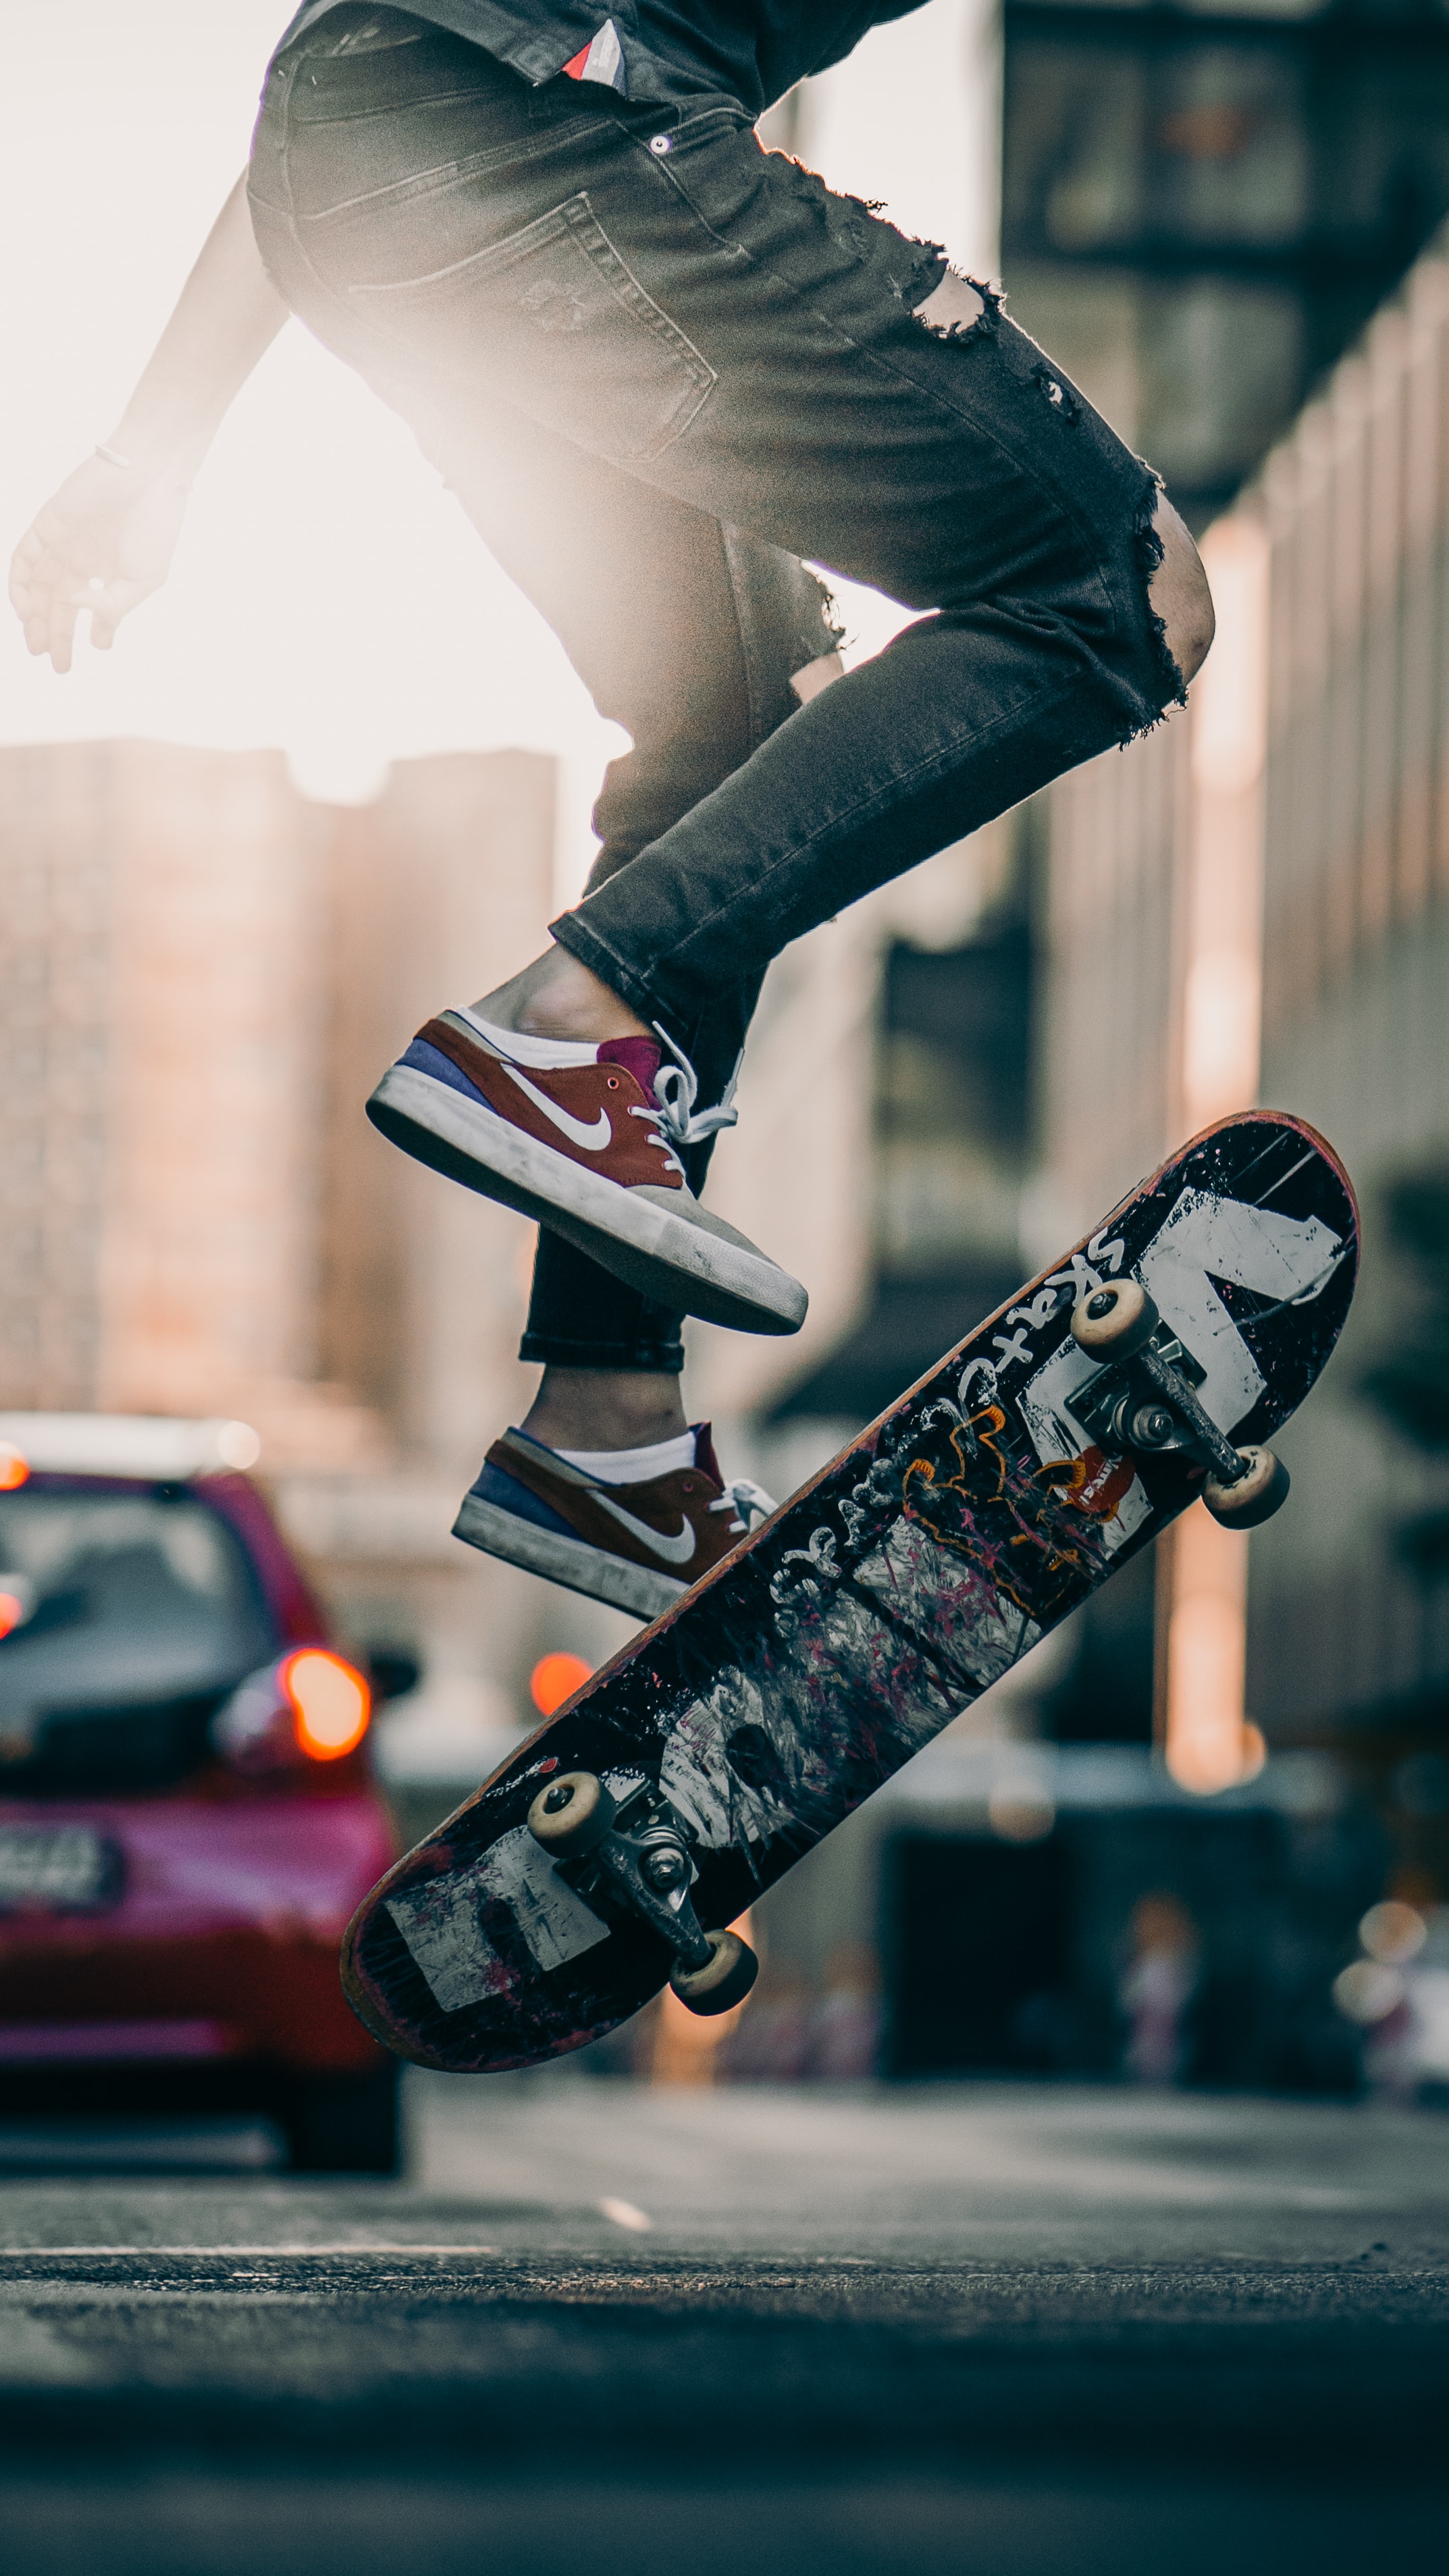 Wallpaper for mobile devices beams, street, sneakers, legs